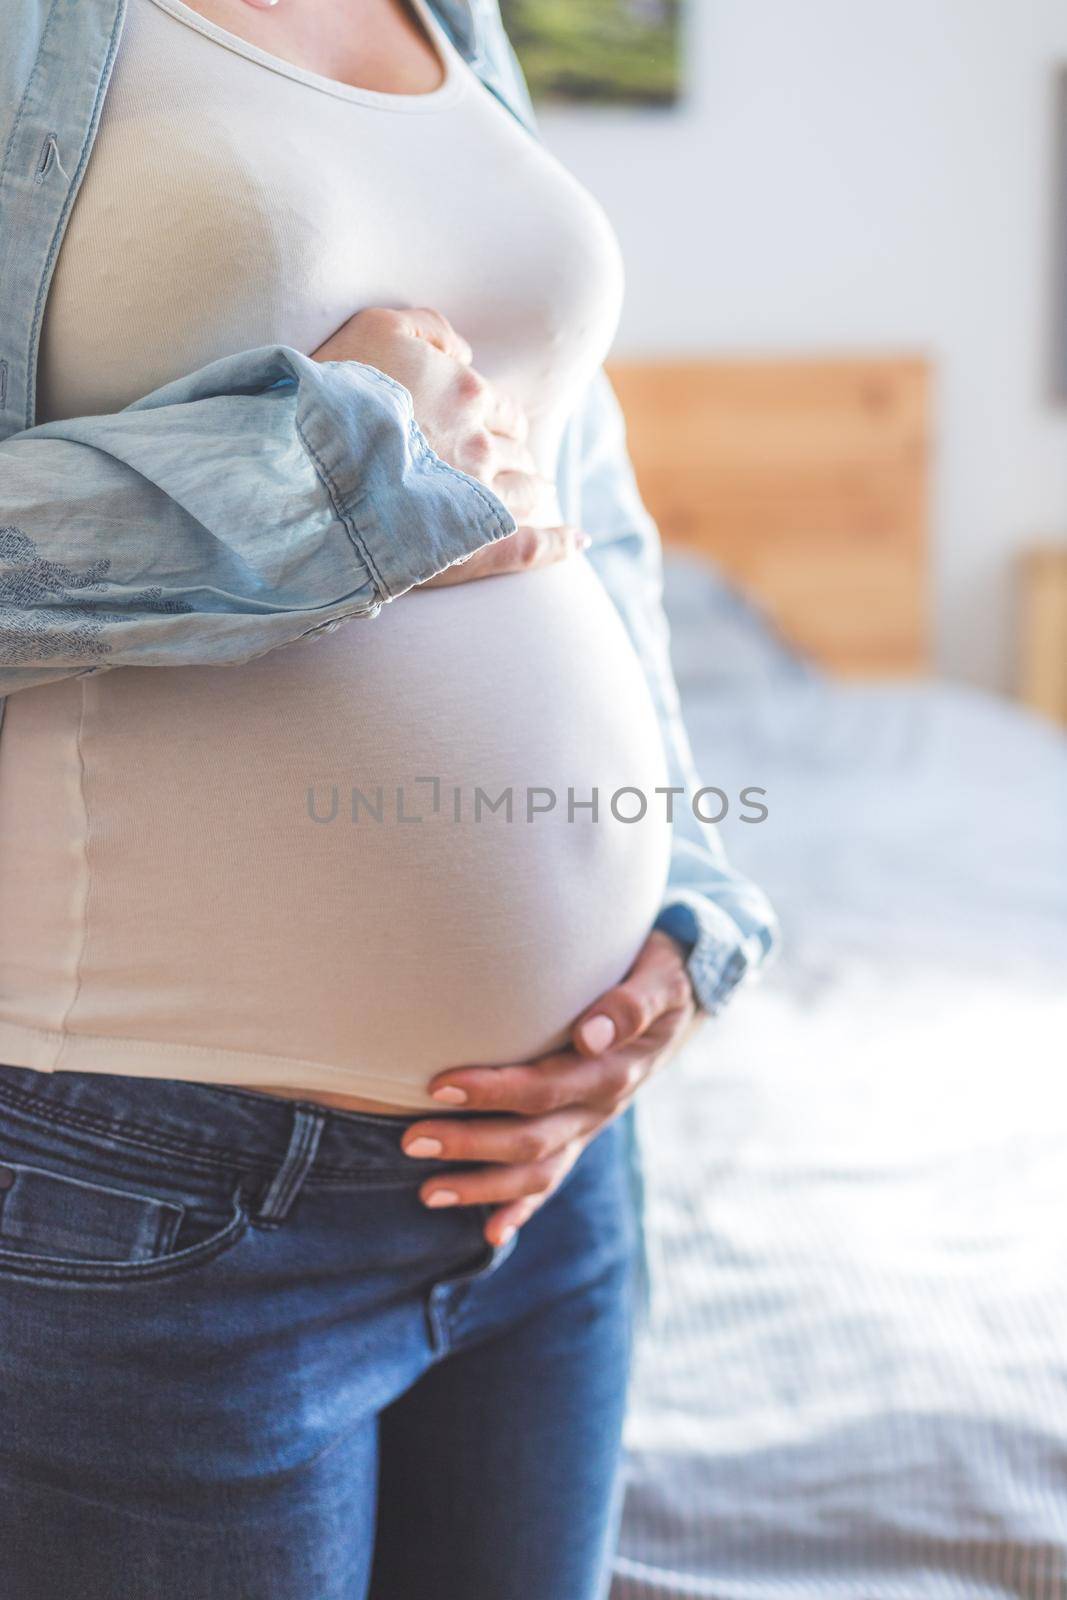 Caucasian pregnant mother touching her naked tummy, blue jeans, close up